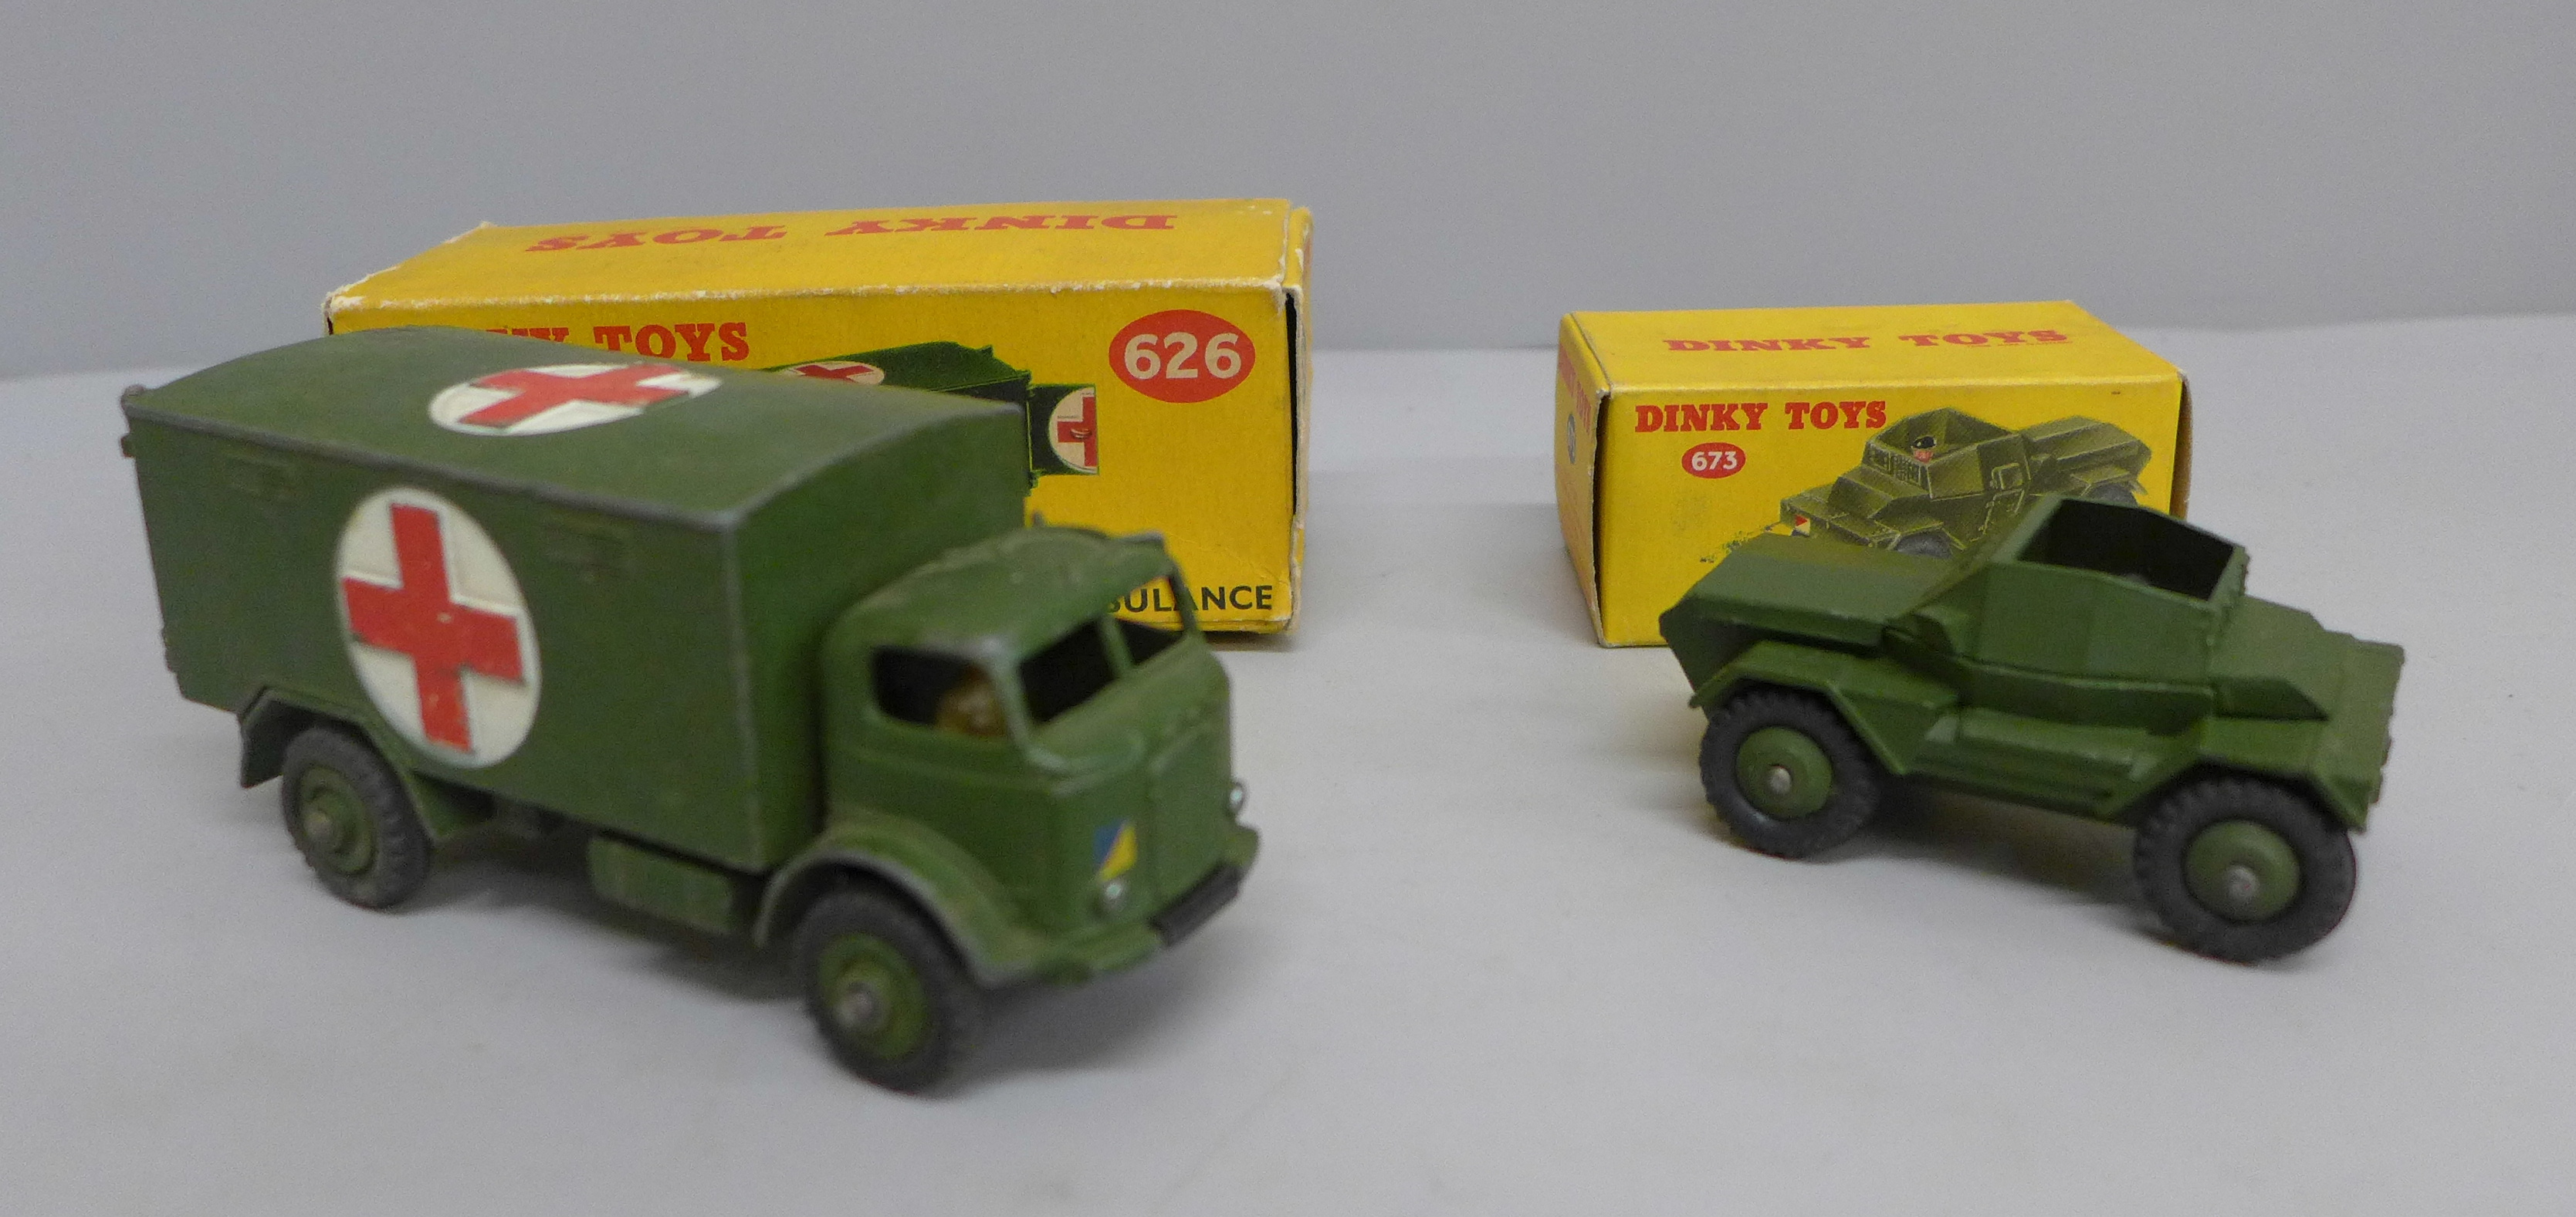 A Dinky Toys 626 Military Ambulance and Dinky Toys 673 Scout Car, both boxed